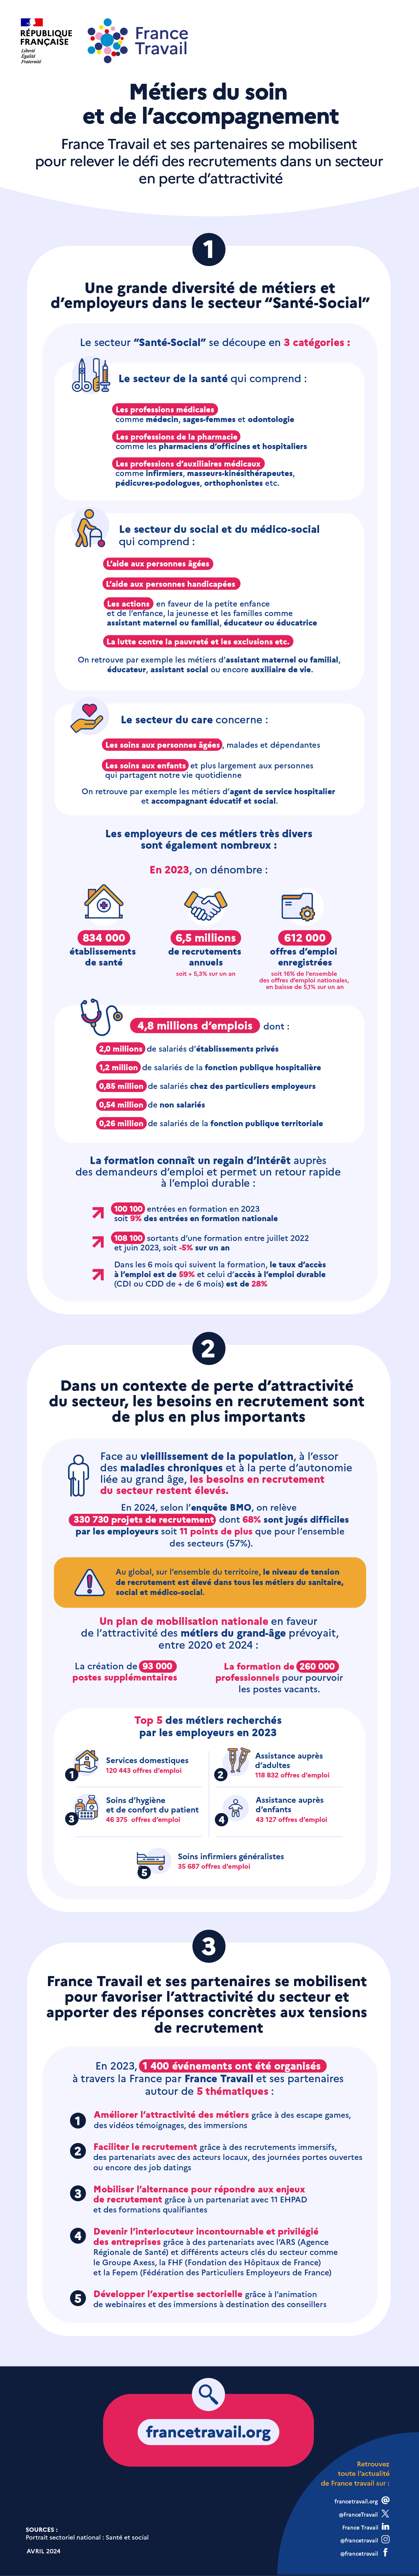 FT-infographie-Metiers-Soin-2024-1.png